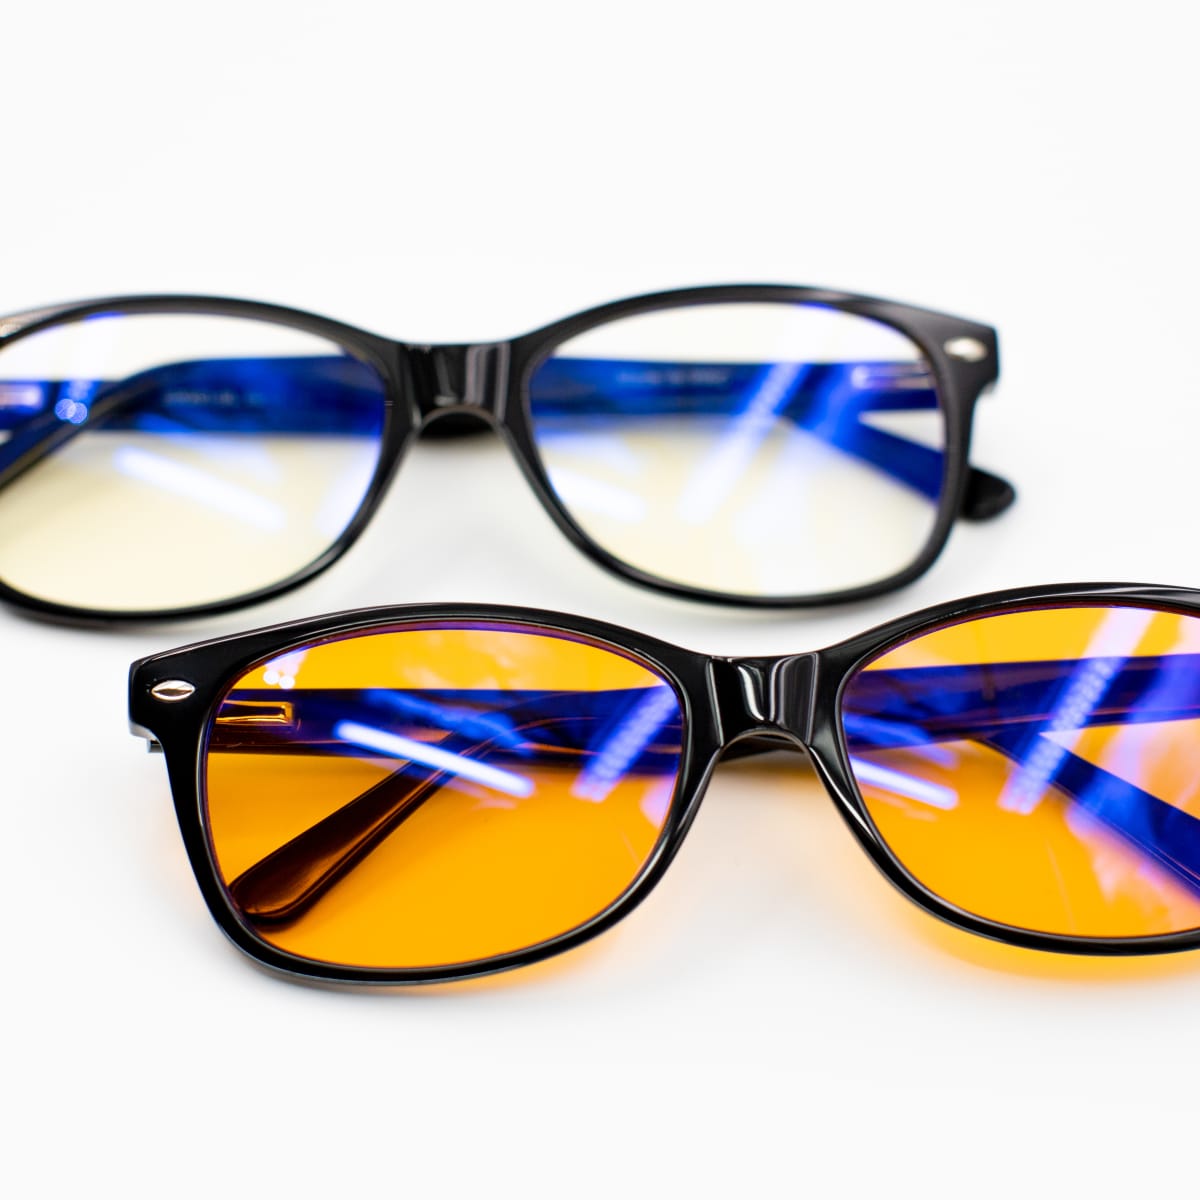 The best blue light blocking glasses are yellow